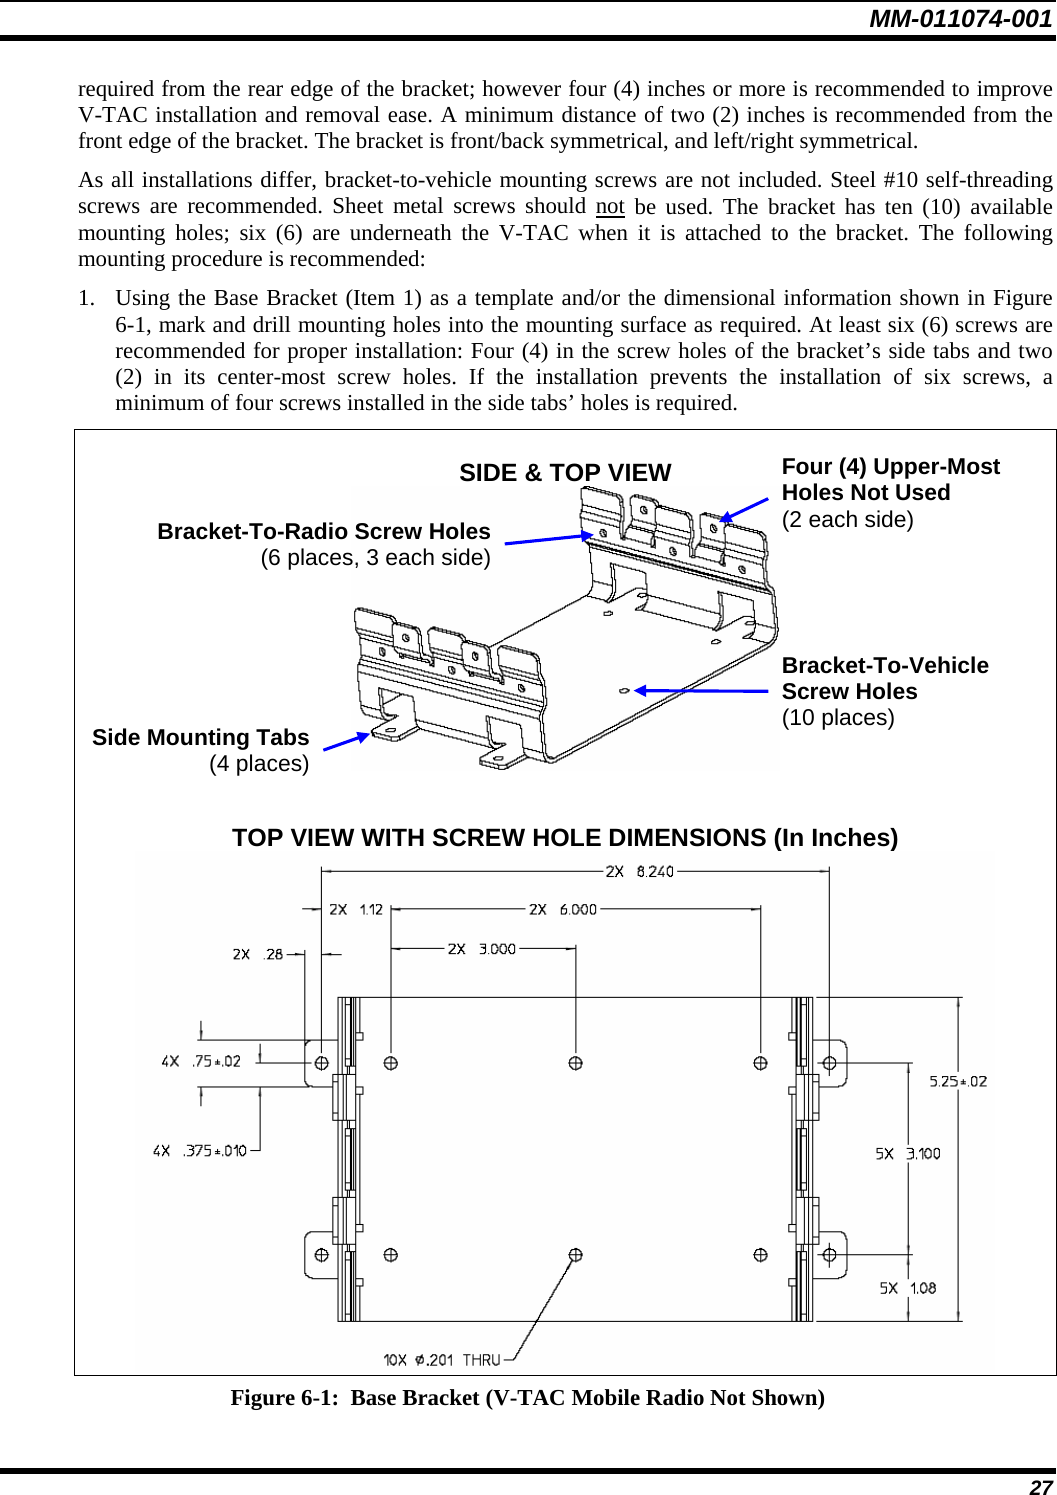 MM-011074-001 27 required from the rear edge of the bracket; however four (4) inches or more is recommended to improve V-TAC installation and removal ease. A minimum distance of two (2) inches is recommended from the front edge of the bracket. The bracket is front/back symmetrical, and left/right symmetrical. As all installations differ, bracket-to-vehicle mounting screws are not included. Steel #10 self-threading screws are recommended. Sheet metal screws should not be used. The bracket has ten (10) available mounting holes; six (6) are underneath the V-TAC when it is attached to the bracket. The following mounting procedure is recommended: 1. Using the Base Bracket (Item 1) as a template and/or the dimensional information shown in Figure 6-1, mark and drill mounting holes into the mounting surface as required. At least six (6) screws are recommended for proper installation: Four (4) in the screw holes of the bracket’s side tabs and two (2) in its center-most screw holes. If the installation prevents the installation of six screws, a minimum of four screws installed in the side tabs’ holes is required.  SIDE &amp; TOP VIEW    TOP VIEW WITH SCREW HOLE DIMENSIONS (In Inches)  Figure 6-1:  Base Bracket (V-TAC Mobile Radio Not Shown) Side Mounting Tabs(4 places)Bracket-To-Vehicle Screw Holes (10 places) Bracket-To-Radio Screw Holes(6 places, 3 each side)Four (4) Upper-Most Holes Not Used (2 each side) 